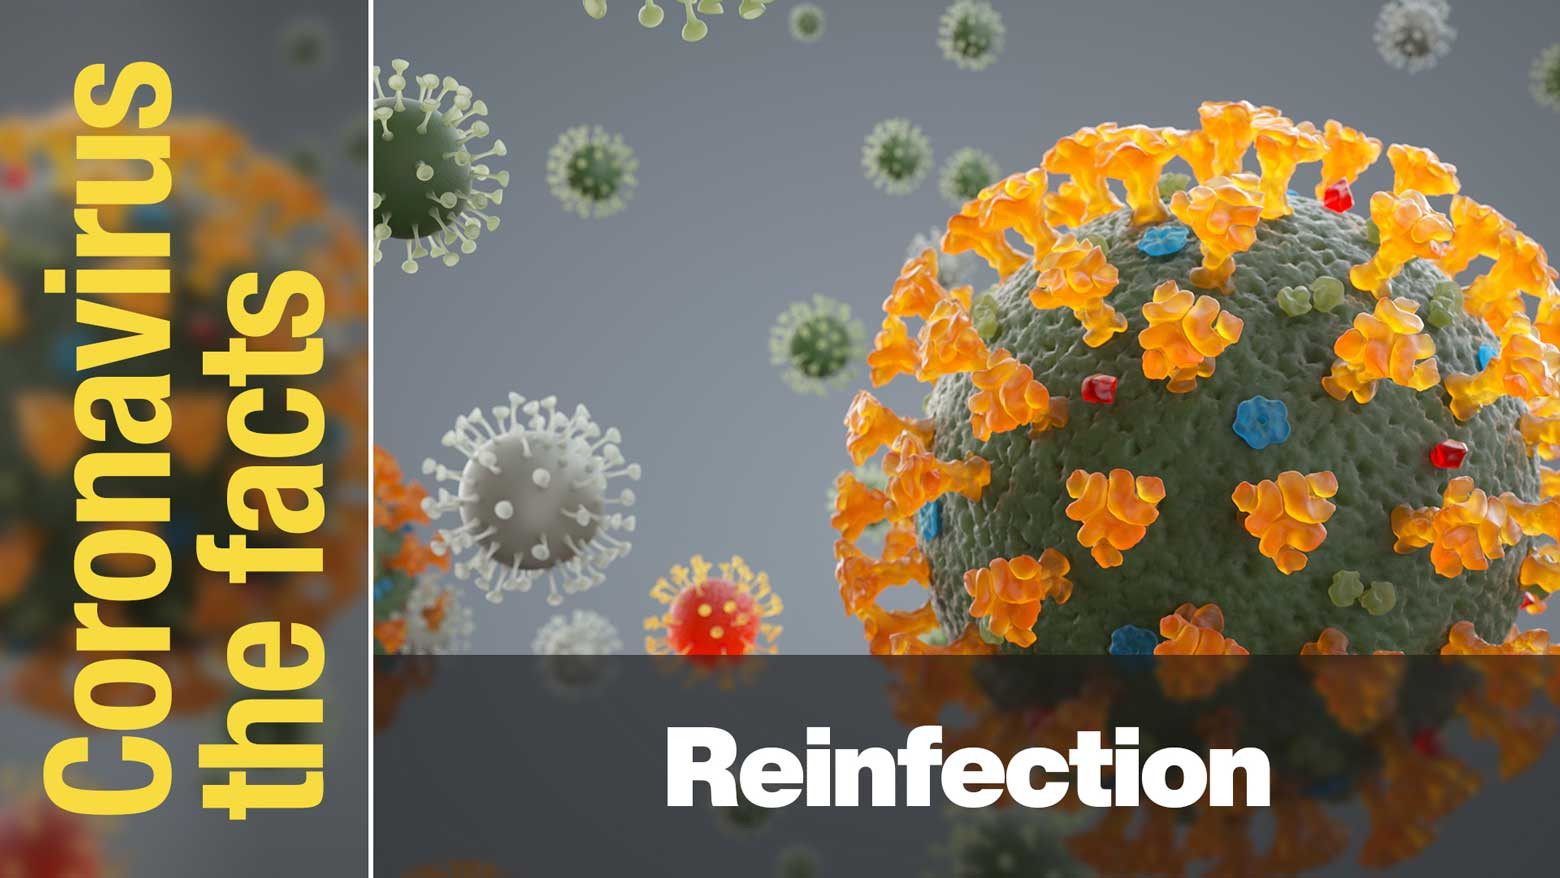 Can reinfection really happen?